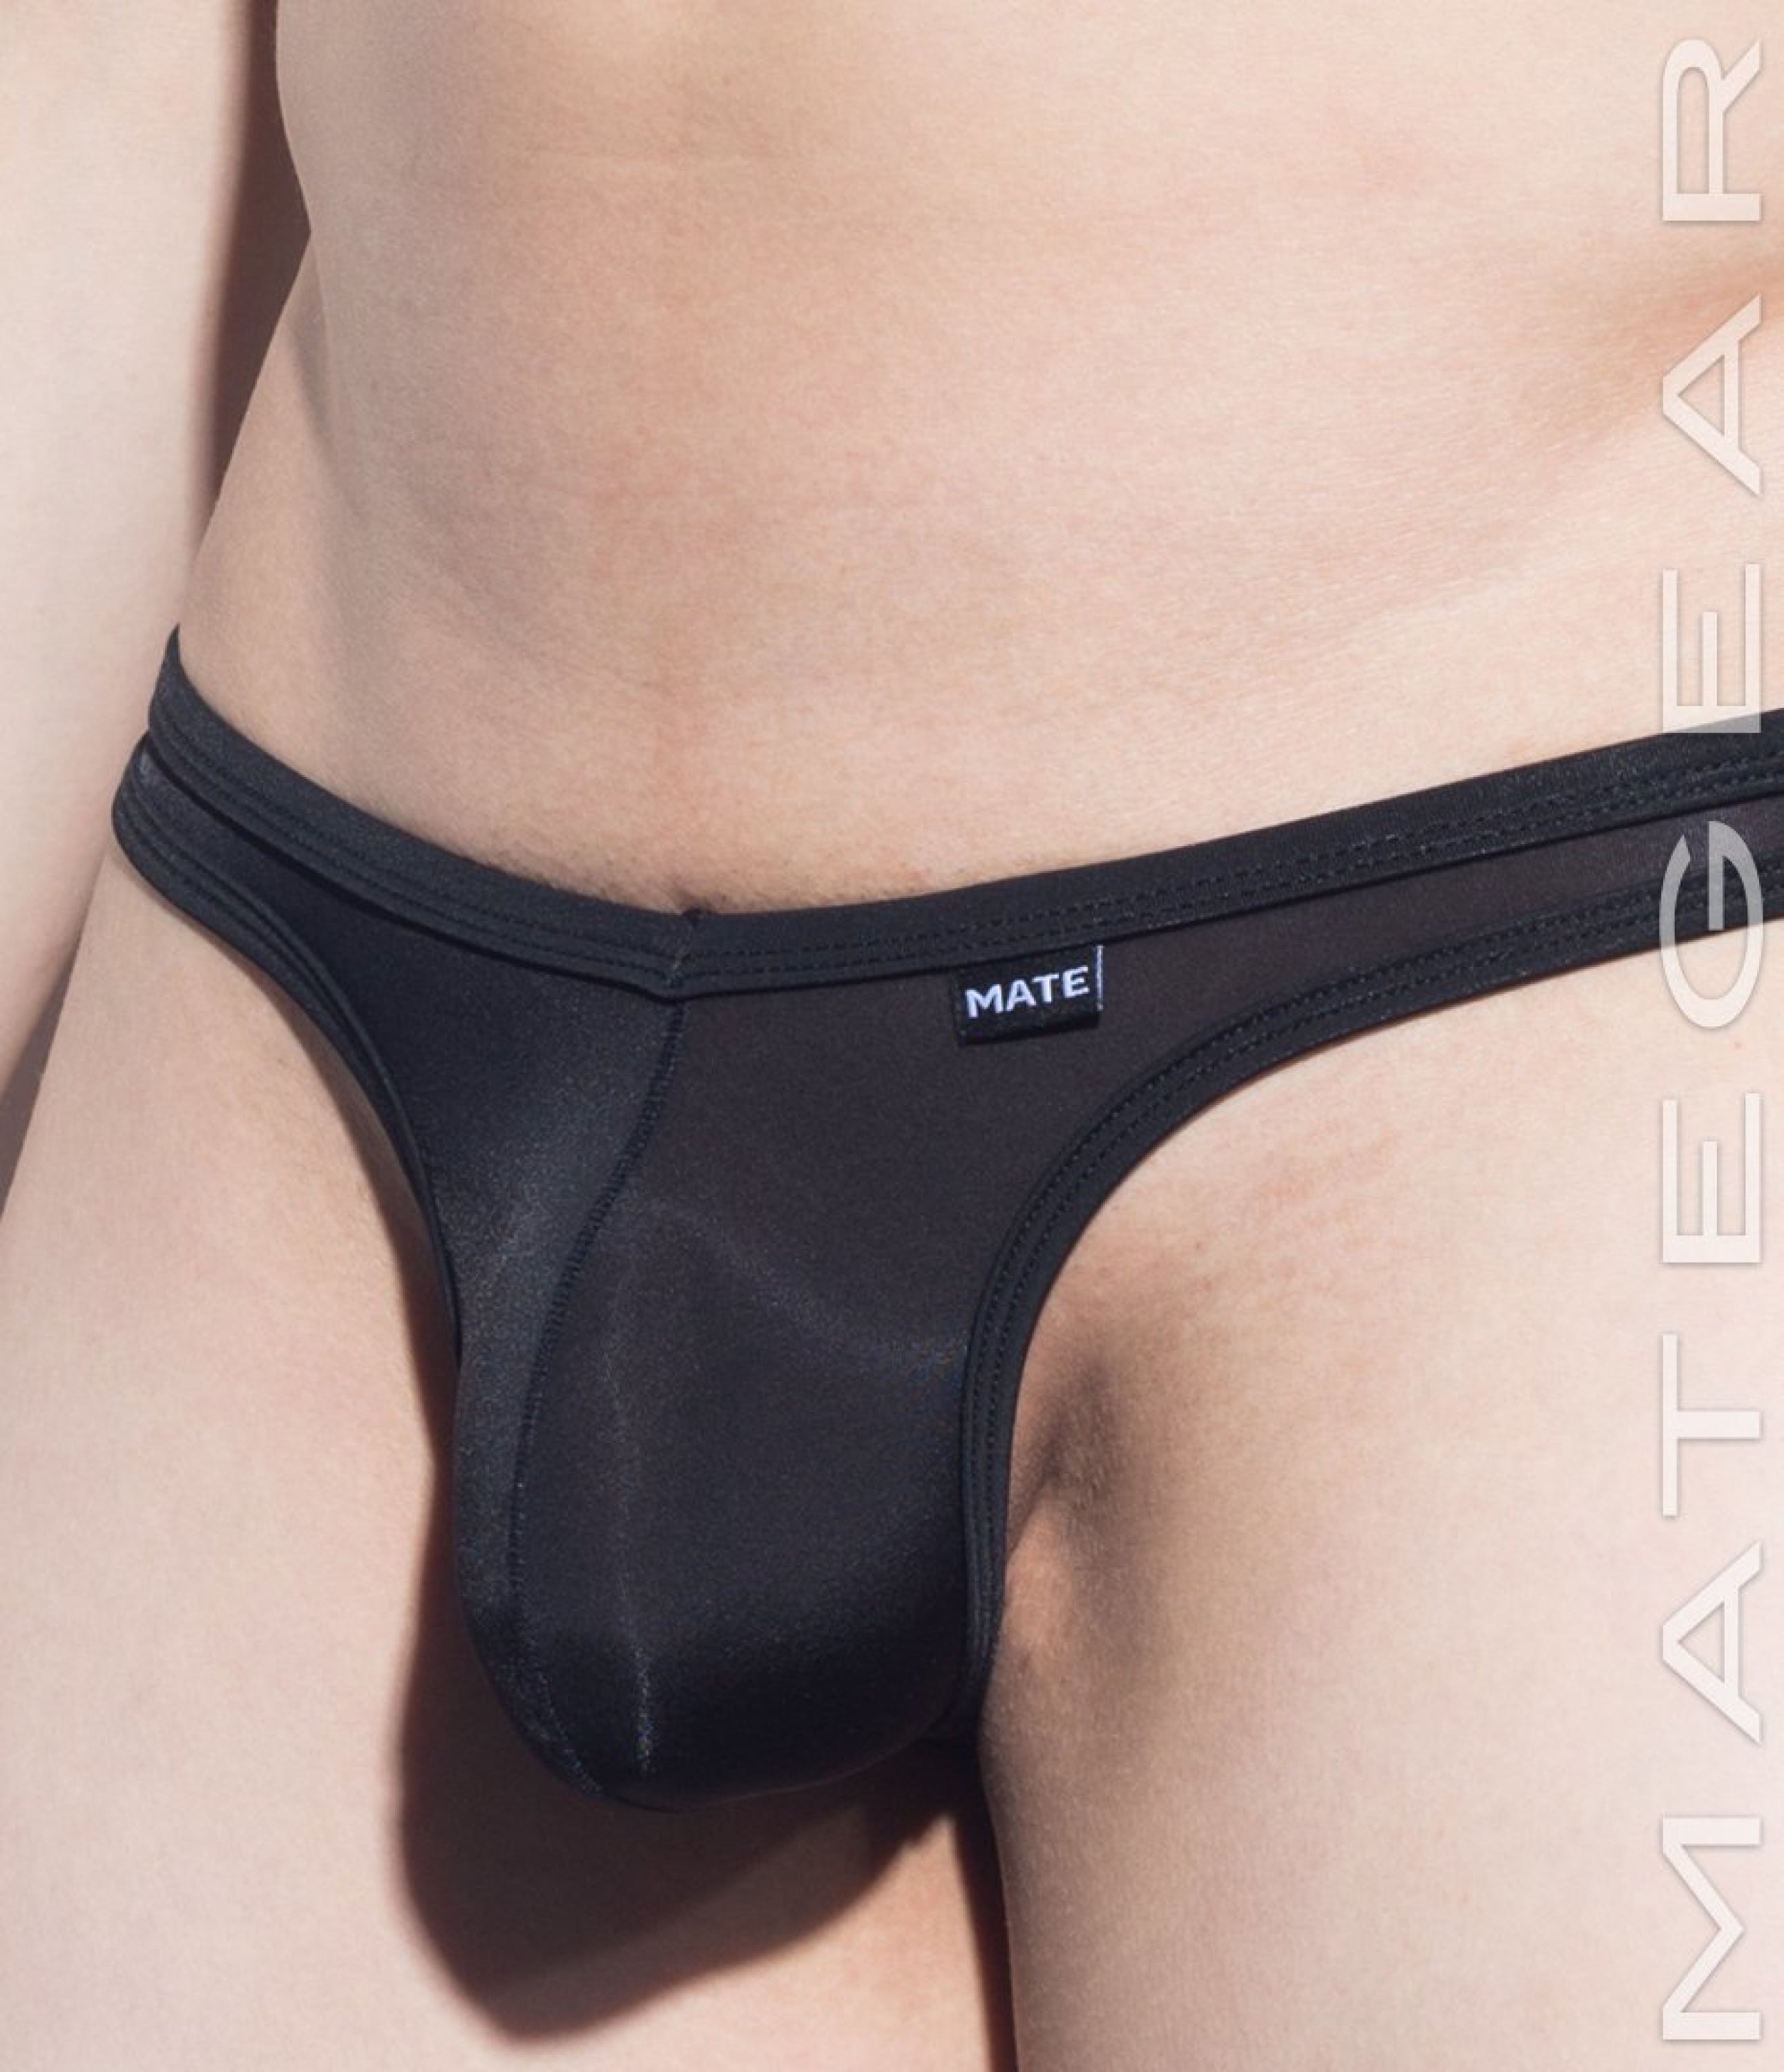 Sexy Men's Underwear Signature Ultra Thongs - Kyo Ha (Ultra Thin Nylon Series / V Front / Tapered Sides) - MATEGEAR - Sexy Men's Swimwear, Underwear, Sportswear and Loungewear